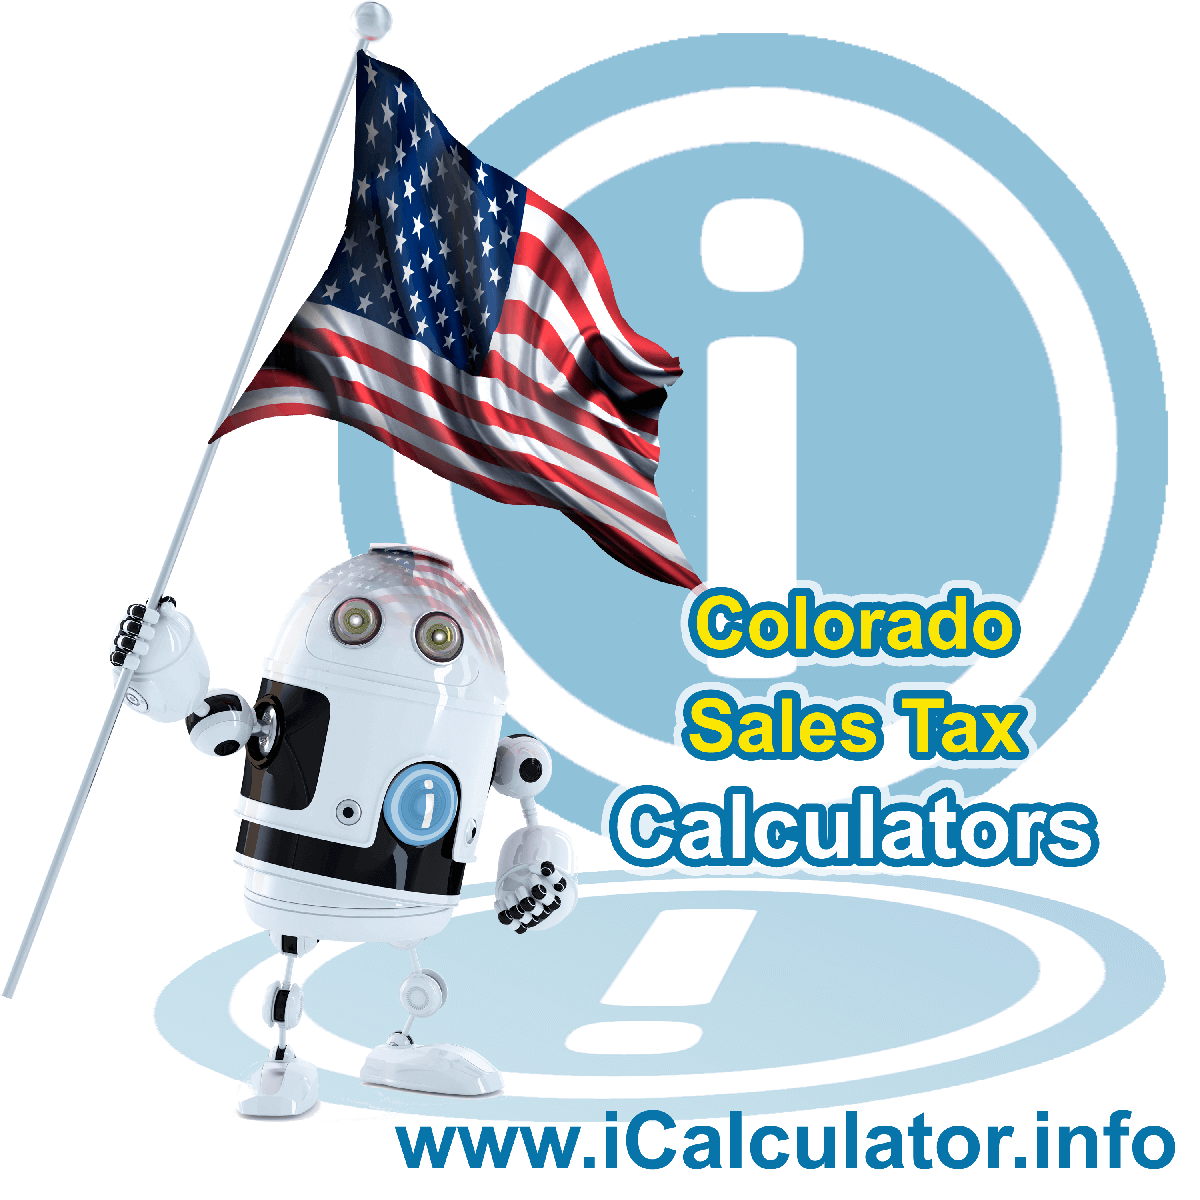 Stratton Sales Rates: This image illustrates a calculator robot calculating Stratton sales tax manually using the Stratton Sales Tax Formula. You can use this information to calculate Stratton Sales Tax manually or use the Stratton Sales Tax Calculator to calculate sales tax online.